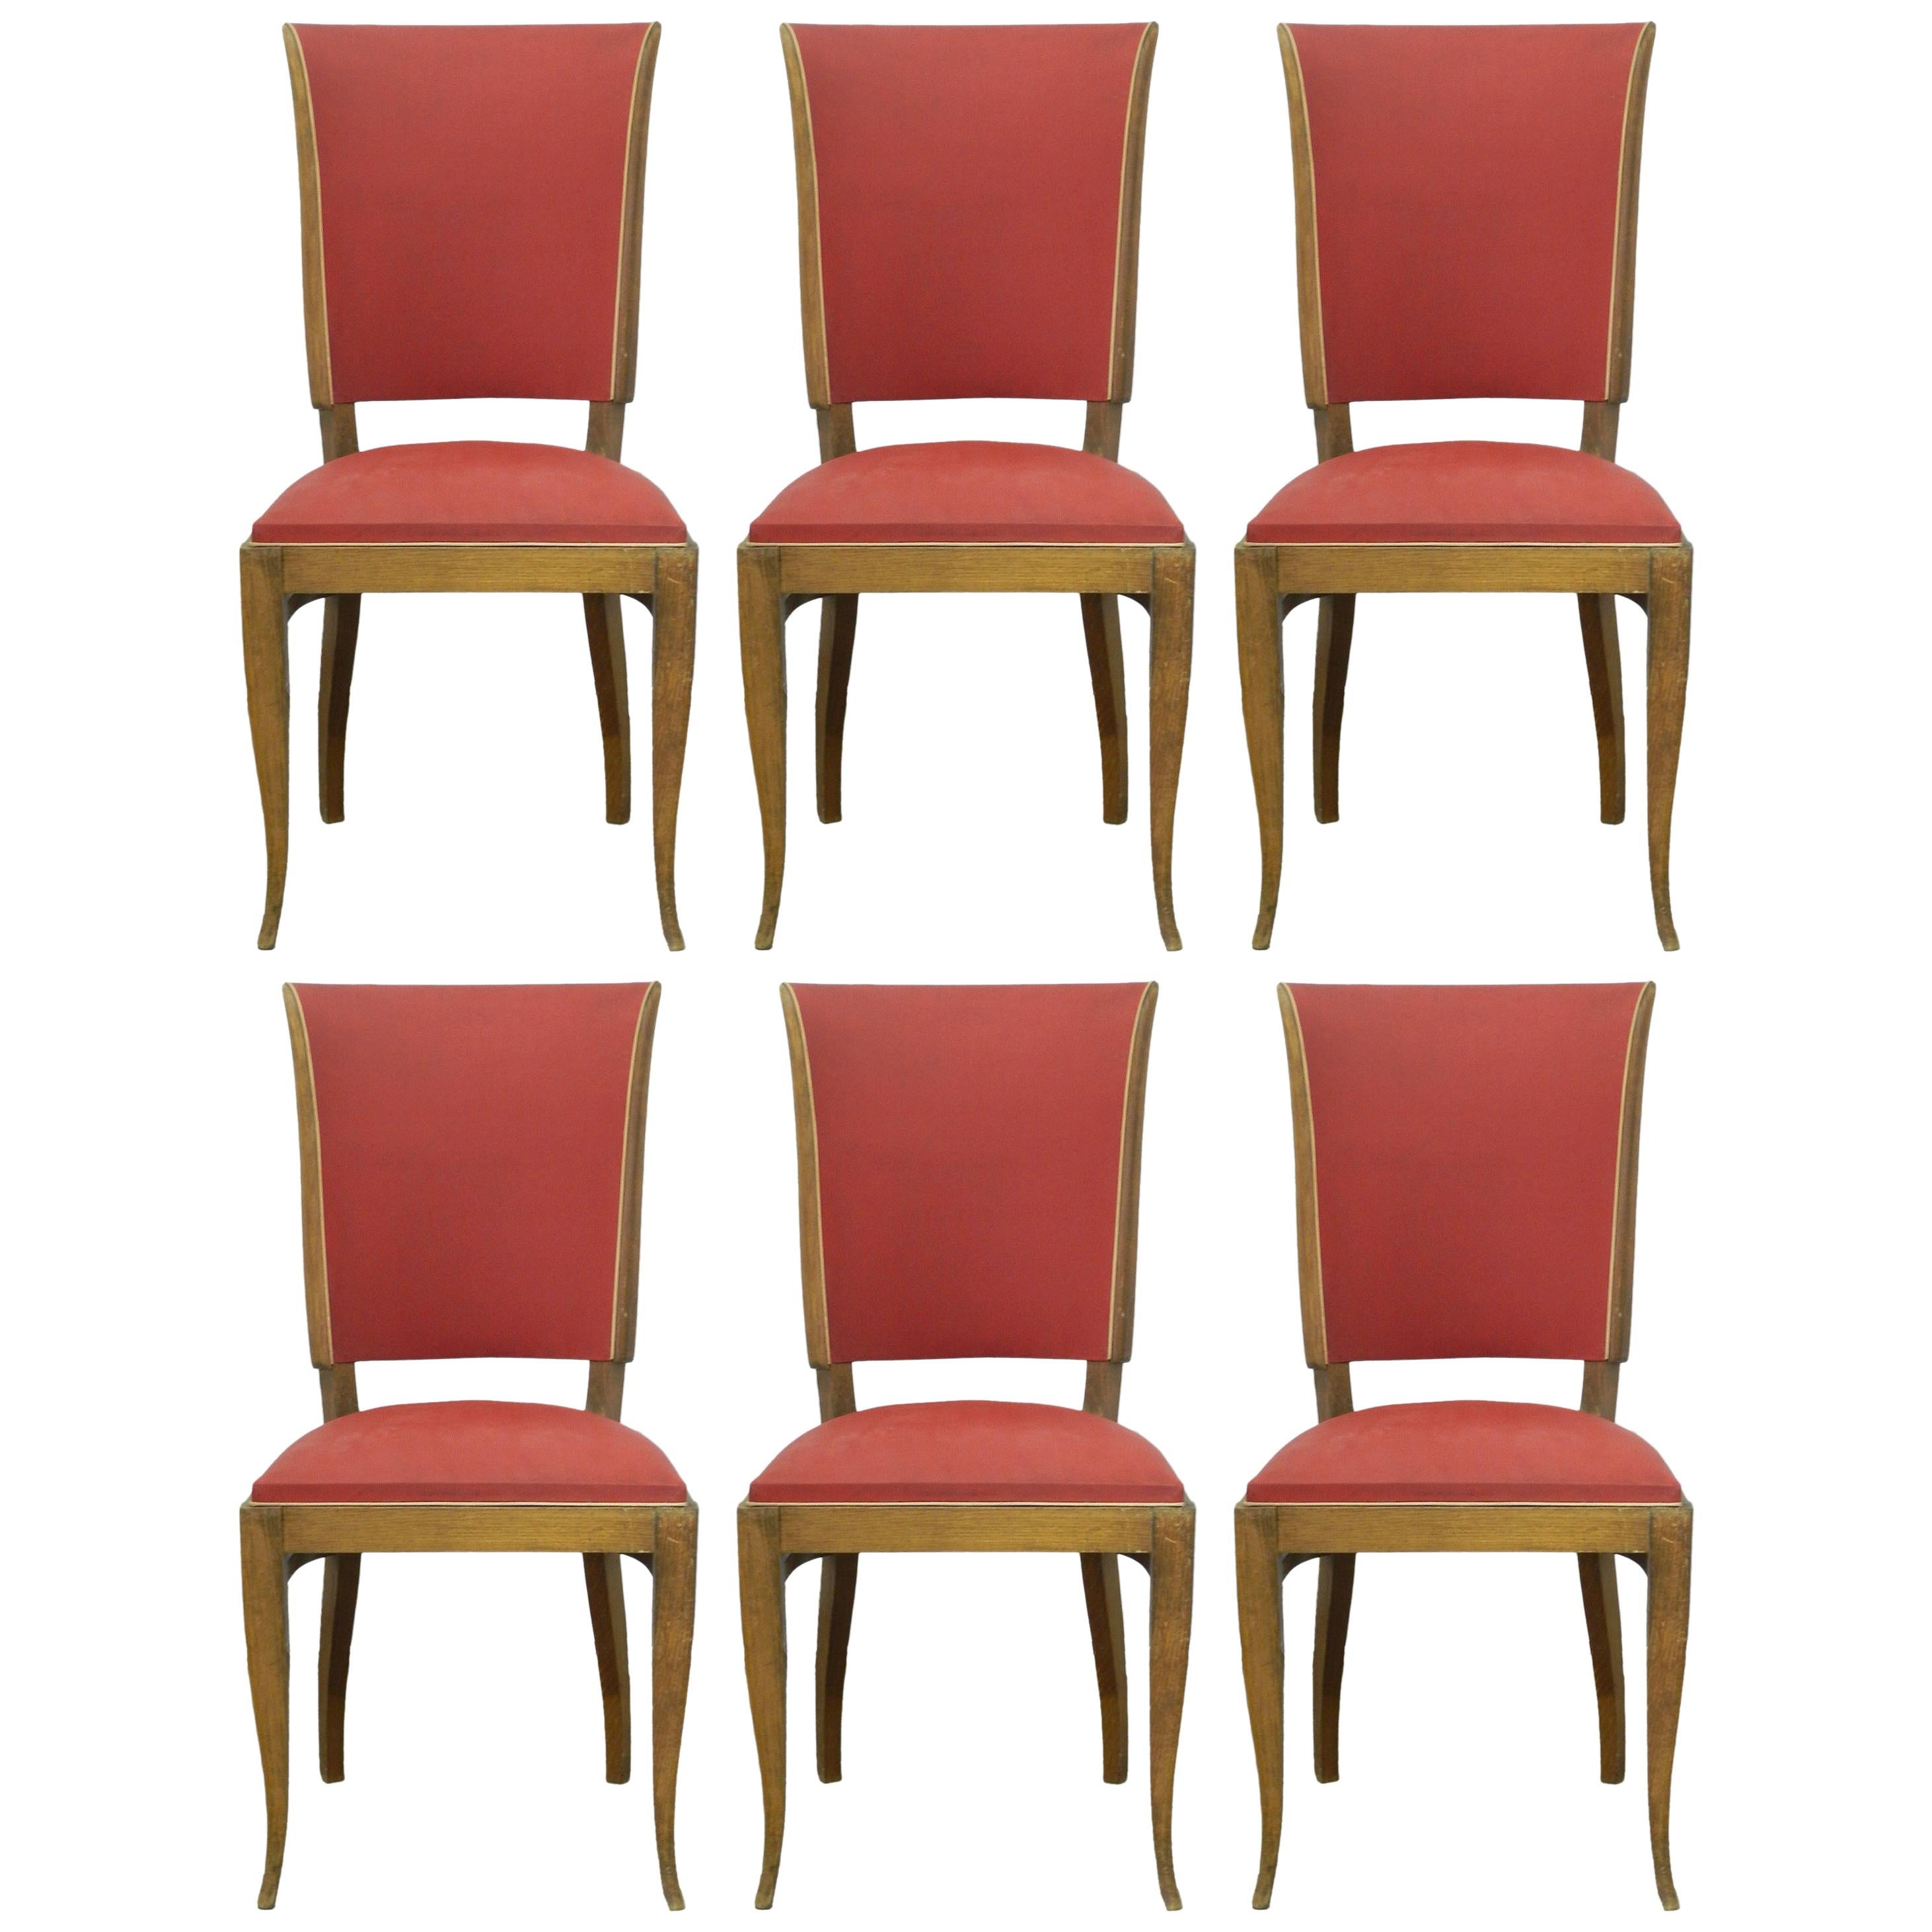 Six Art Deco Dining Chairs French to Recover / Restore, circa 1930